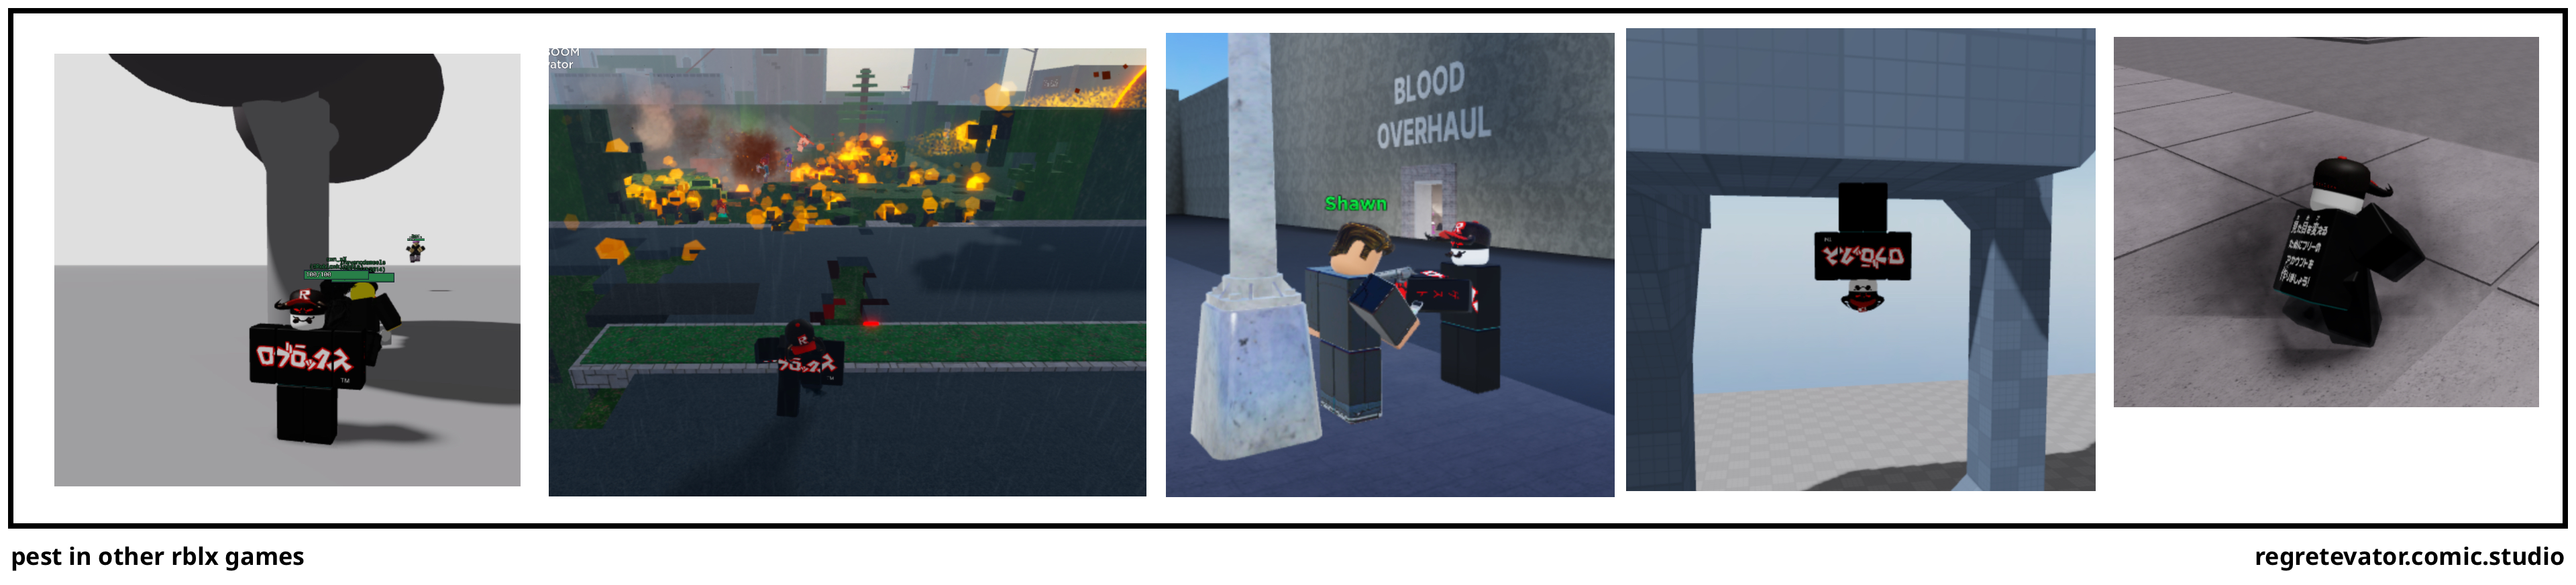 pest in other rblx games